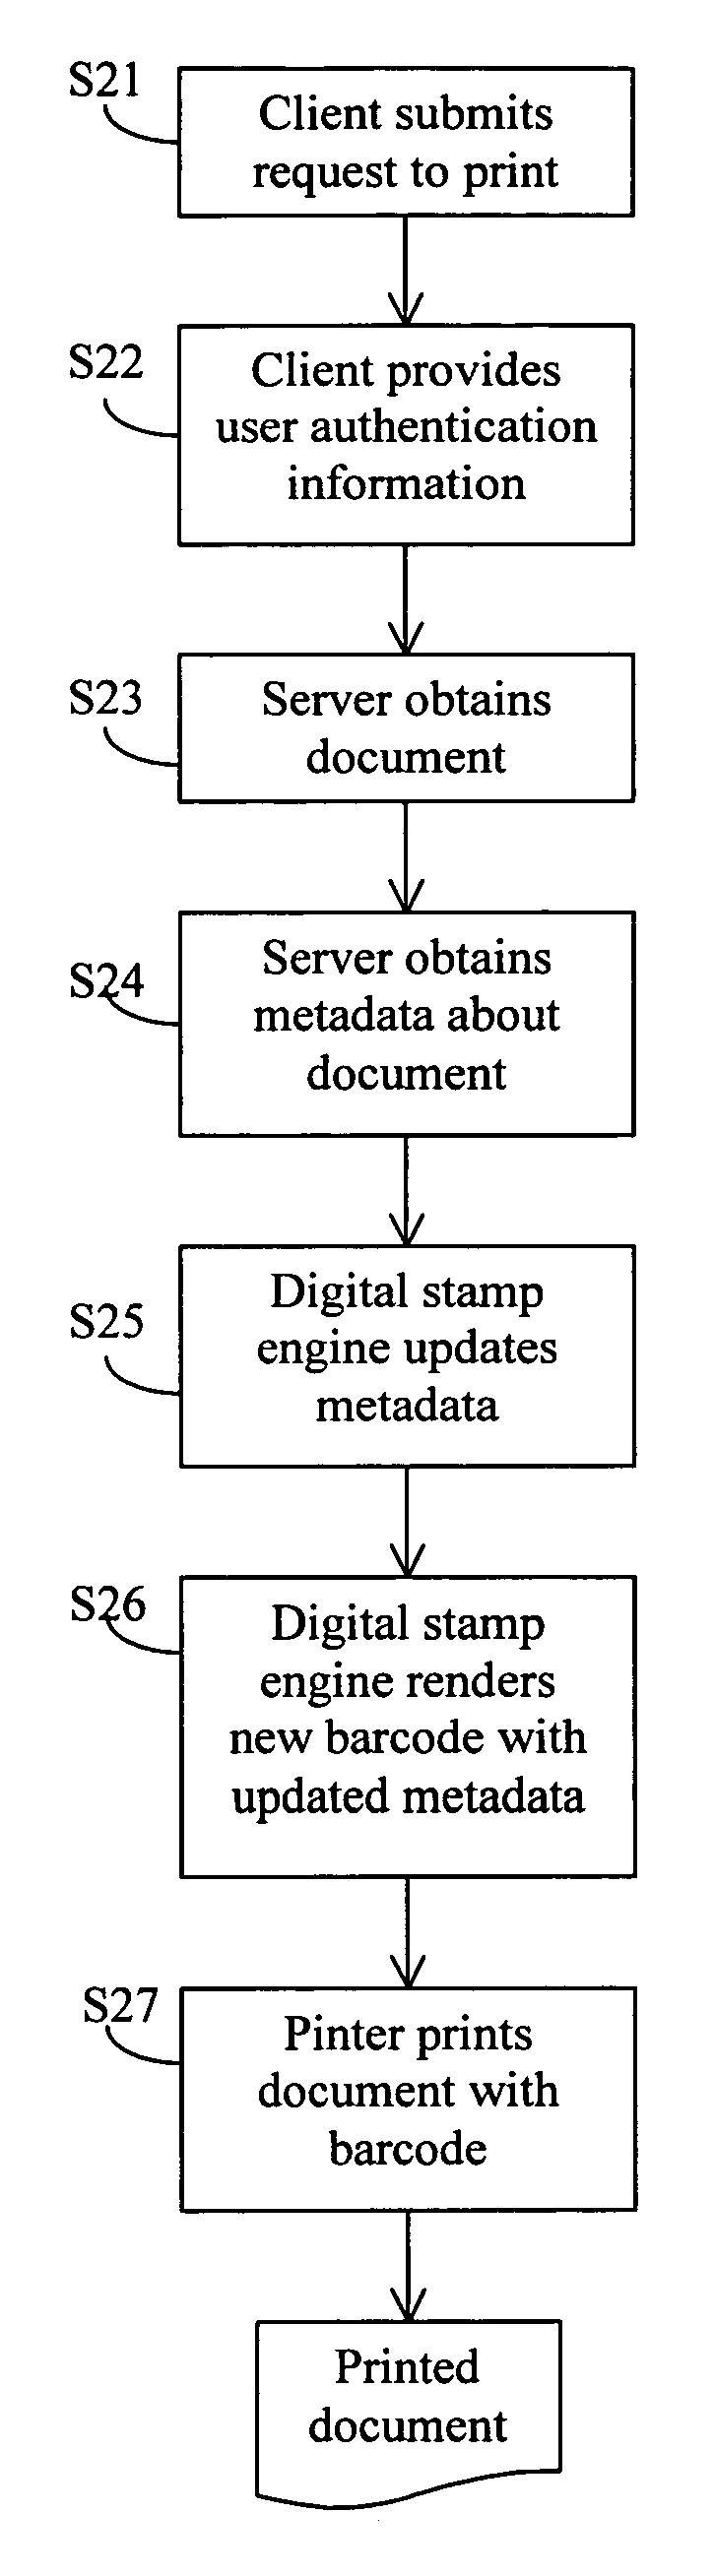 Document management method using barcode to store access history information